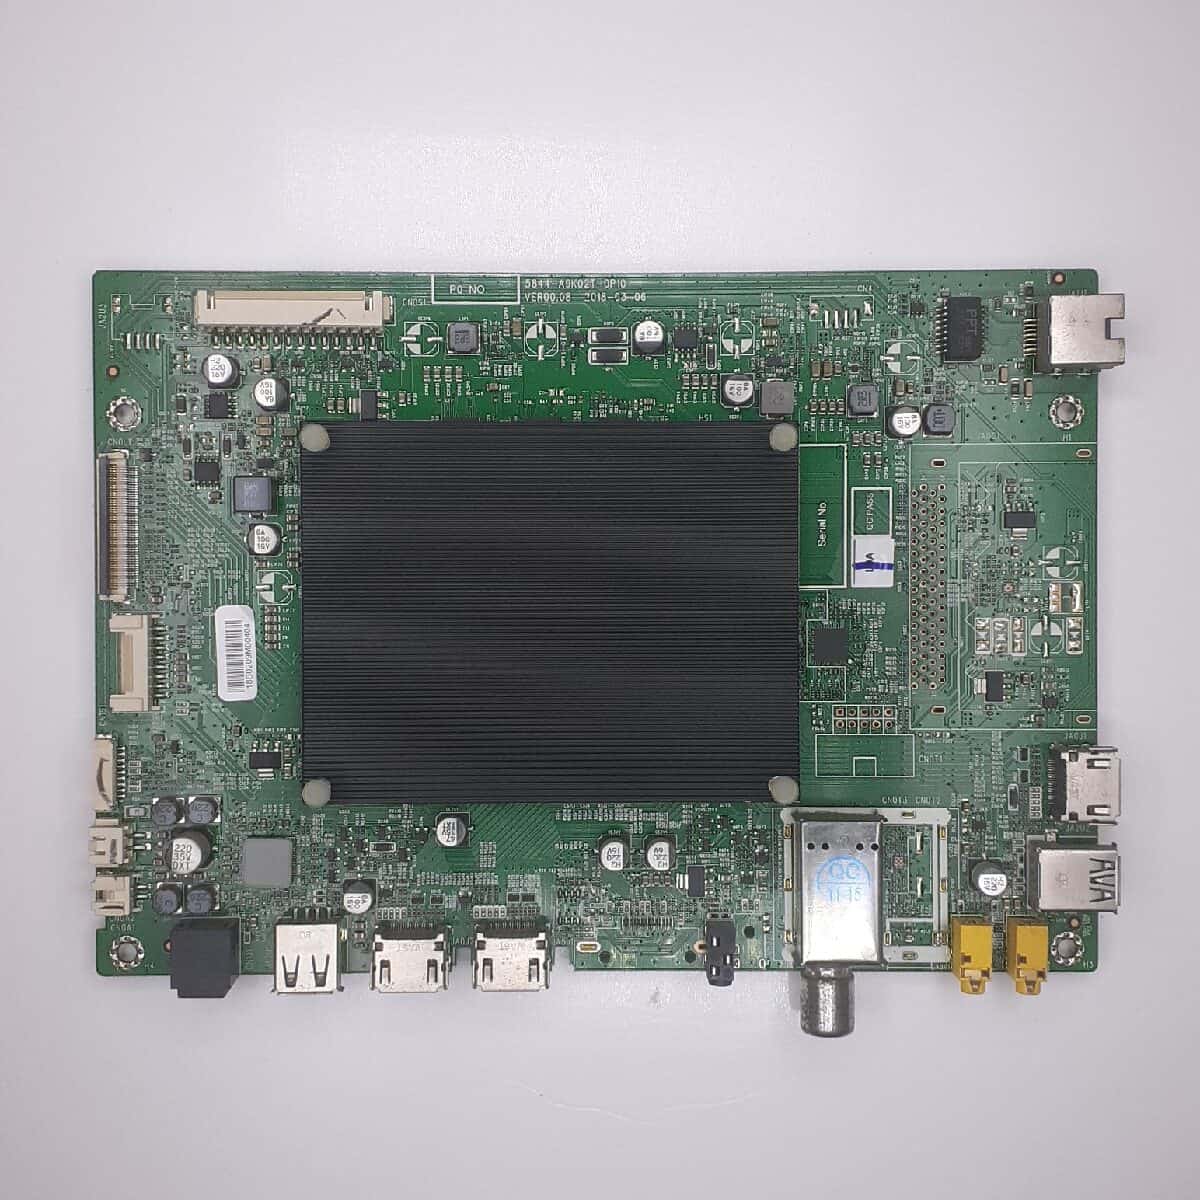 49SAUHD MARQ MOTHERBOARD FOR LED TV